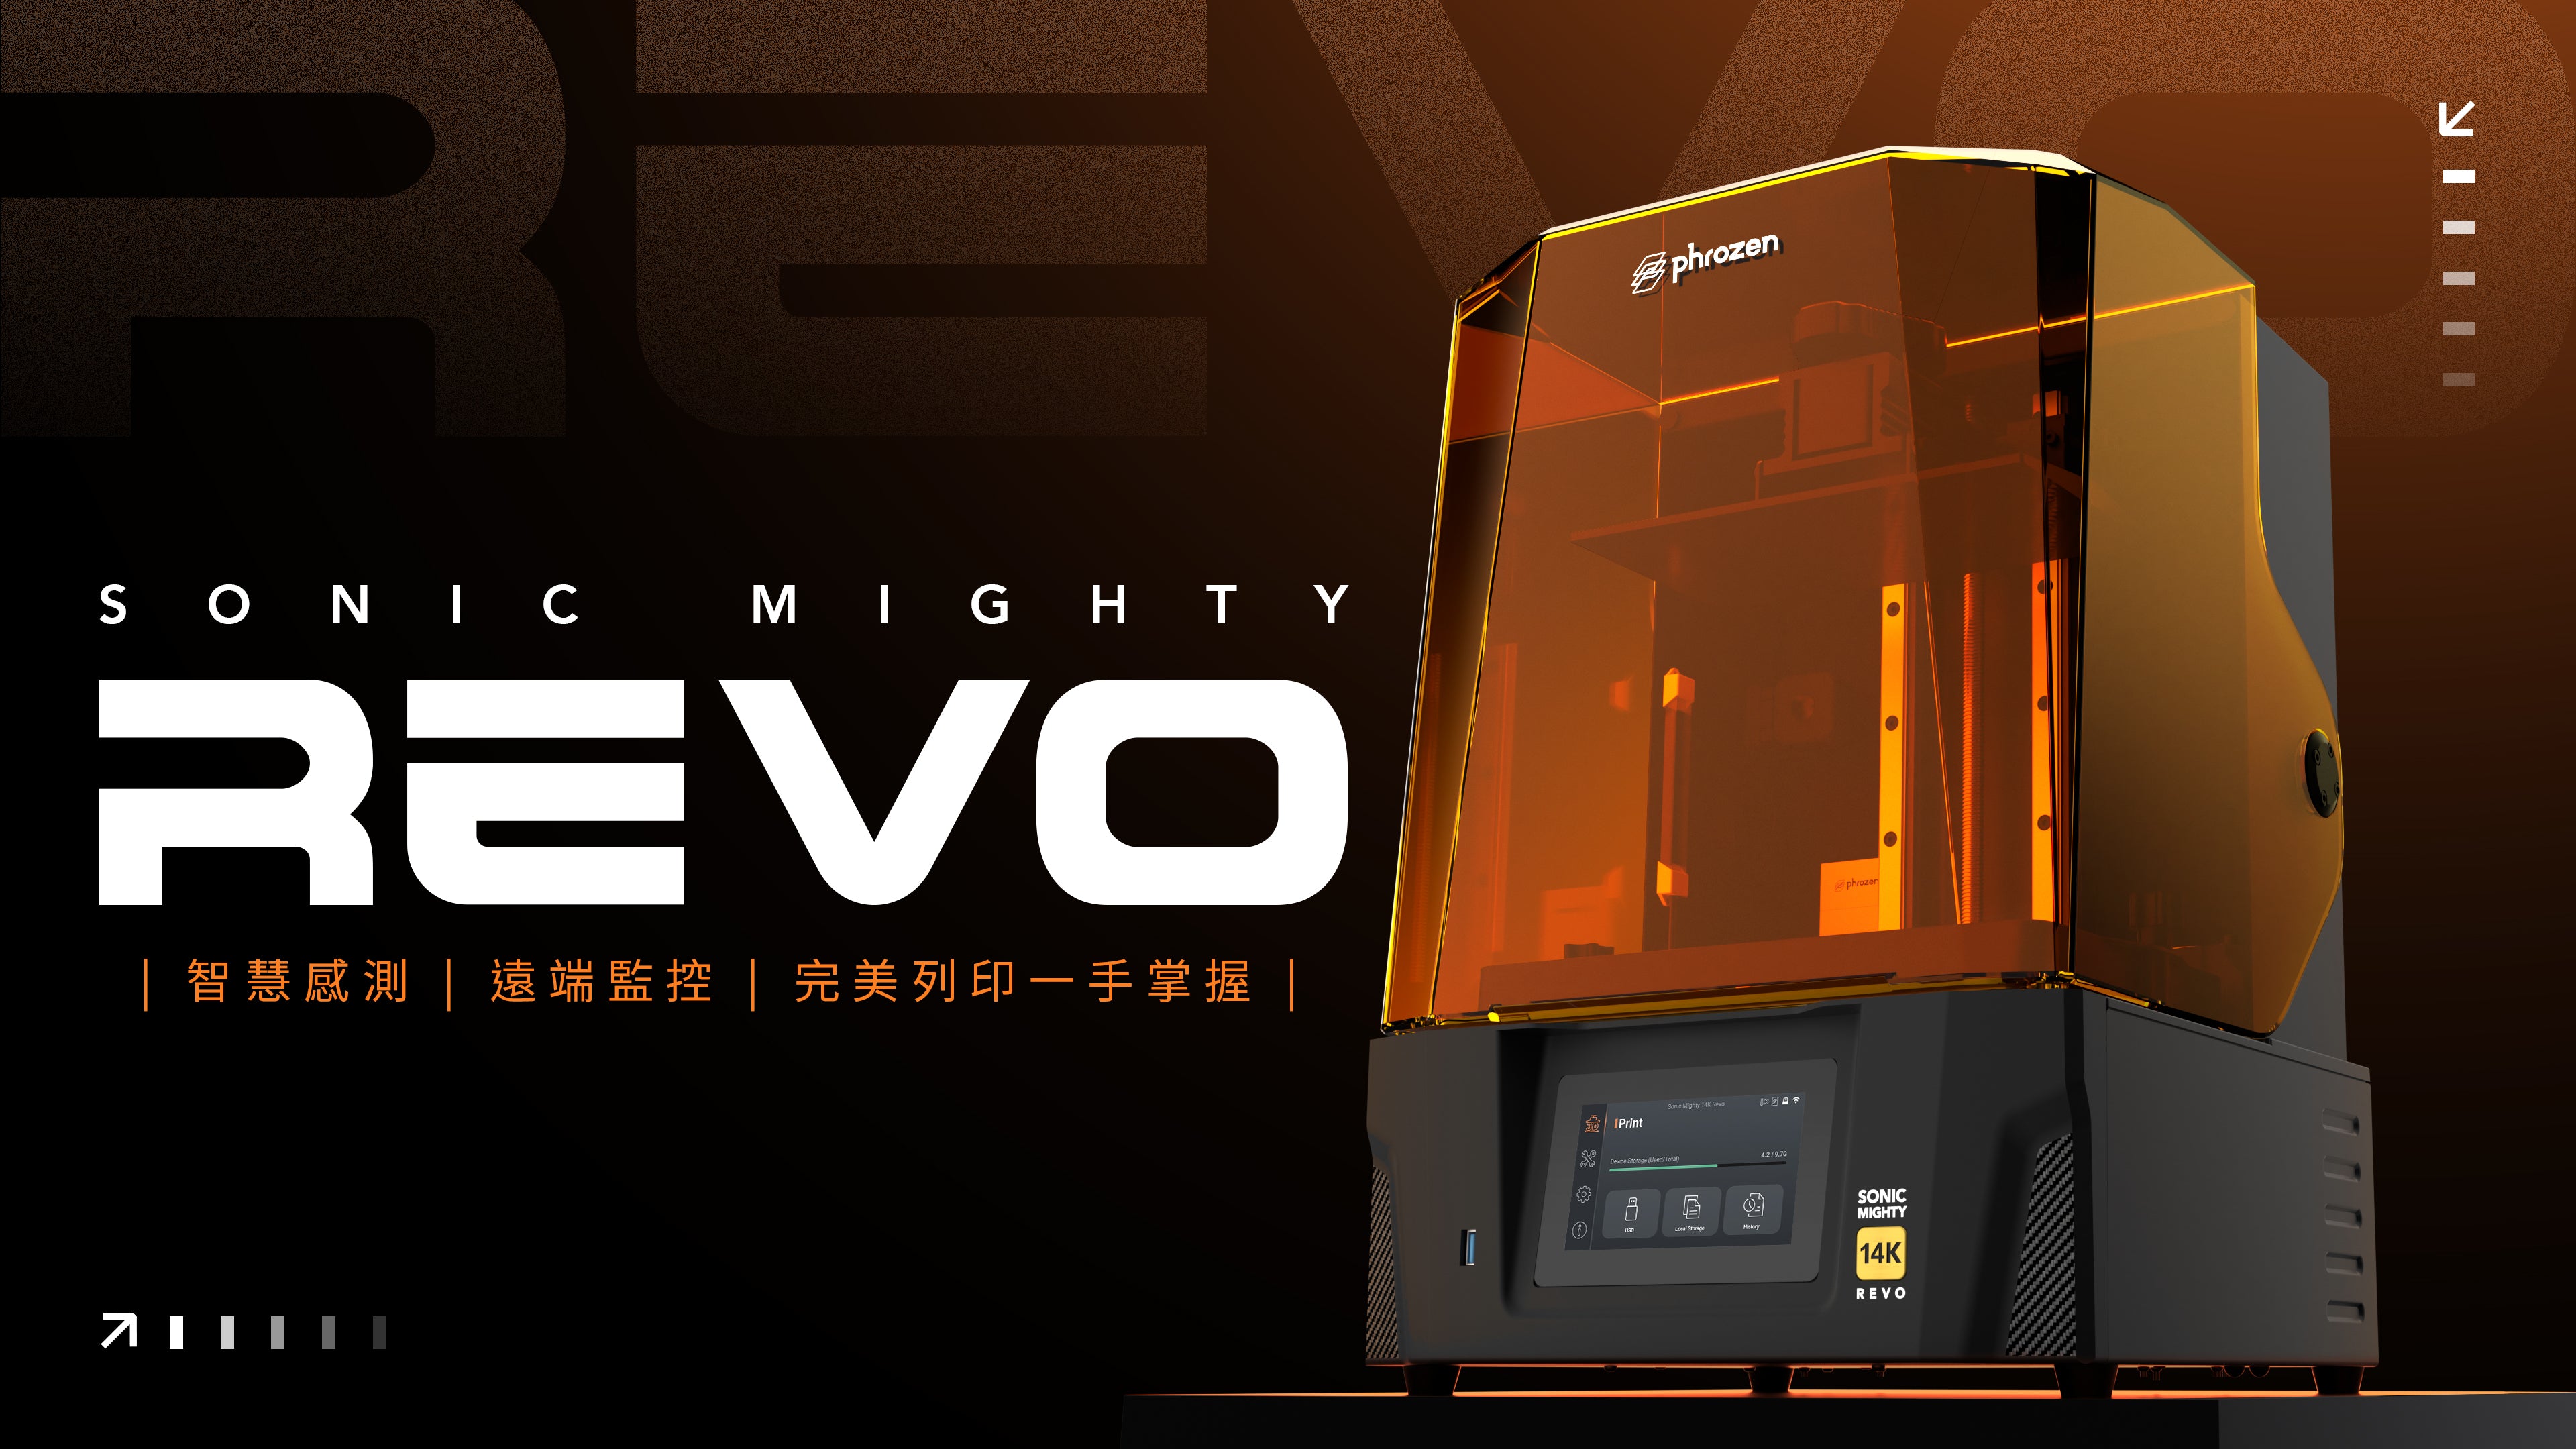 8 Key Features to Know Before Buying the Phrozen Mighty Revo LCD 3D Printer